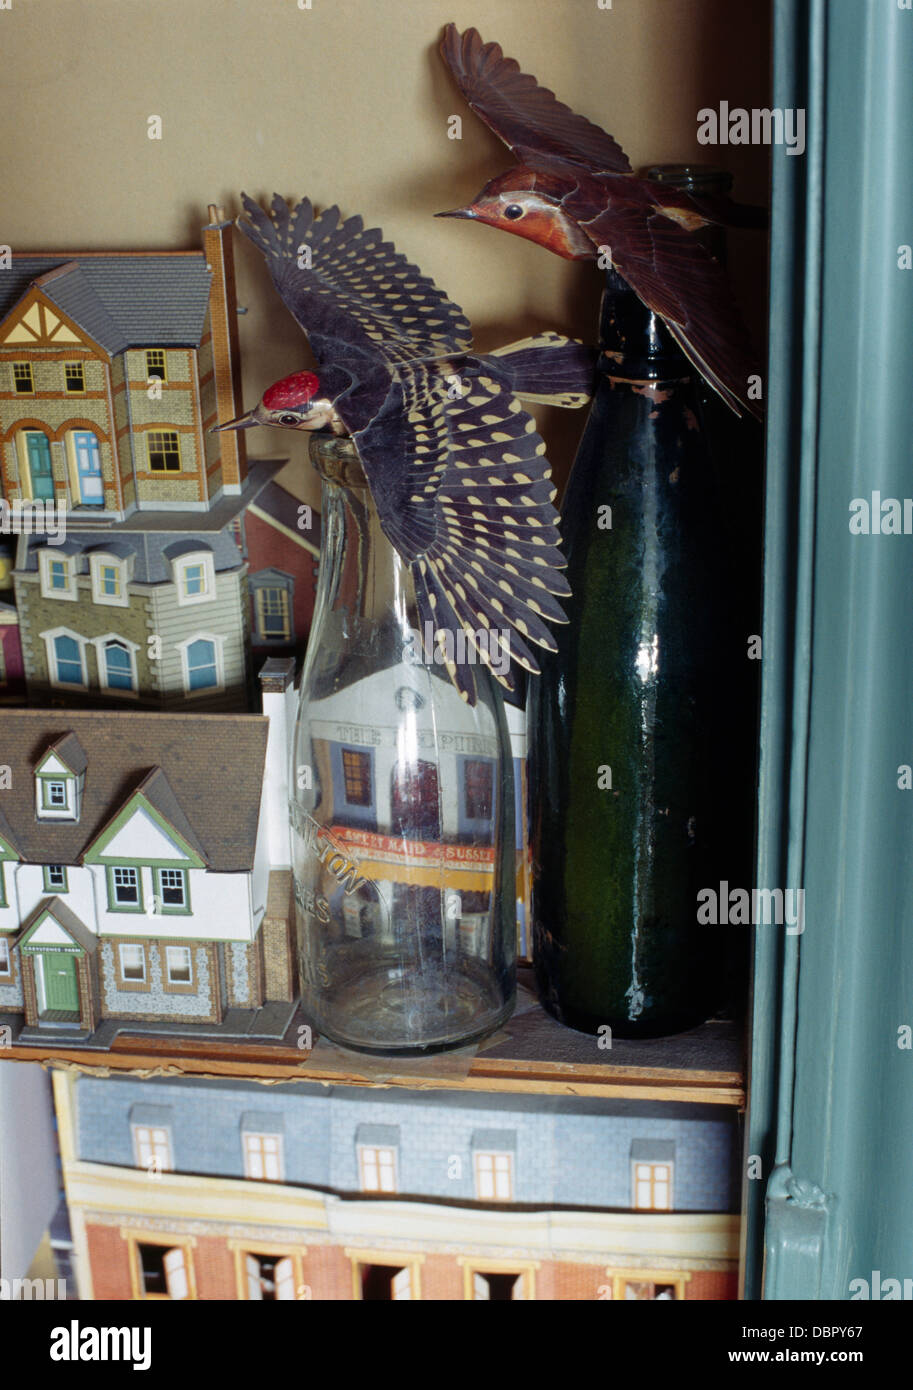 Close-up of wooden birds on old milk bottles beside small dolls houses Stock Photo